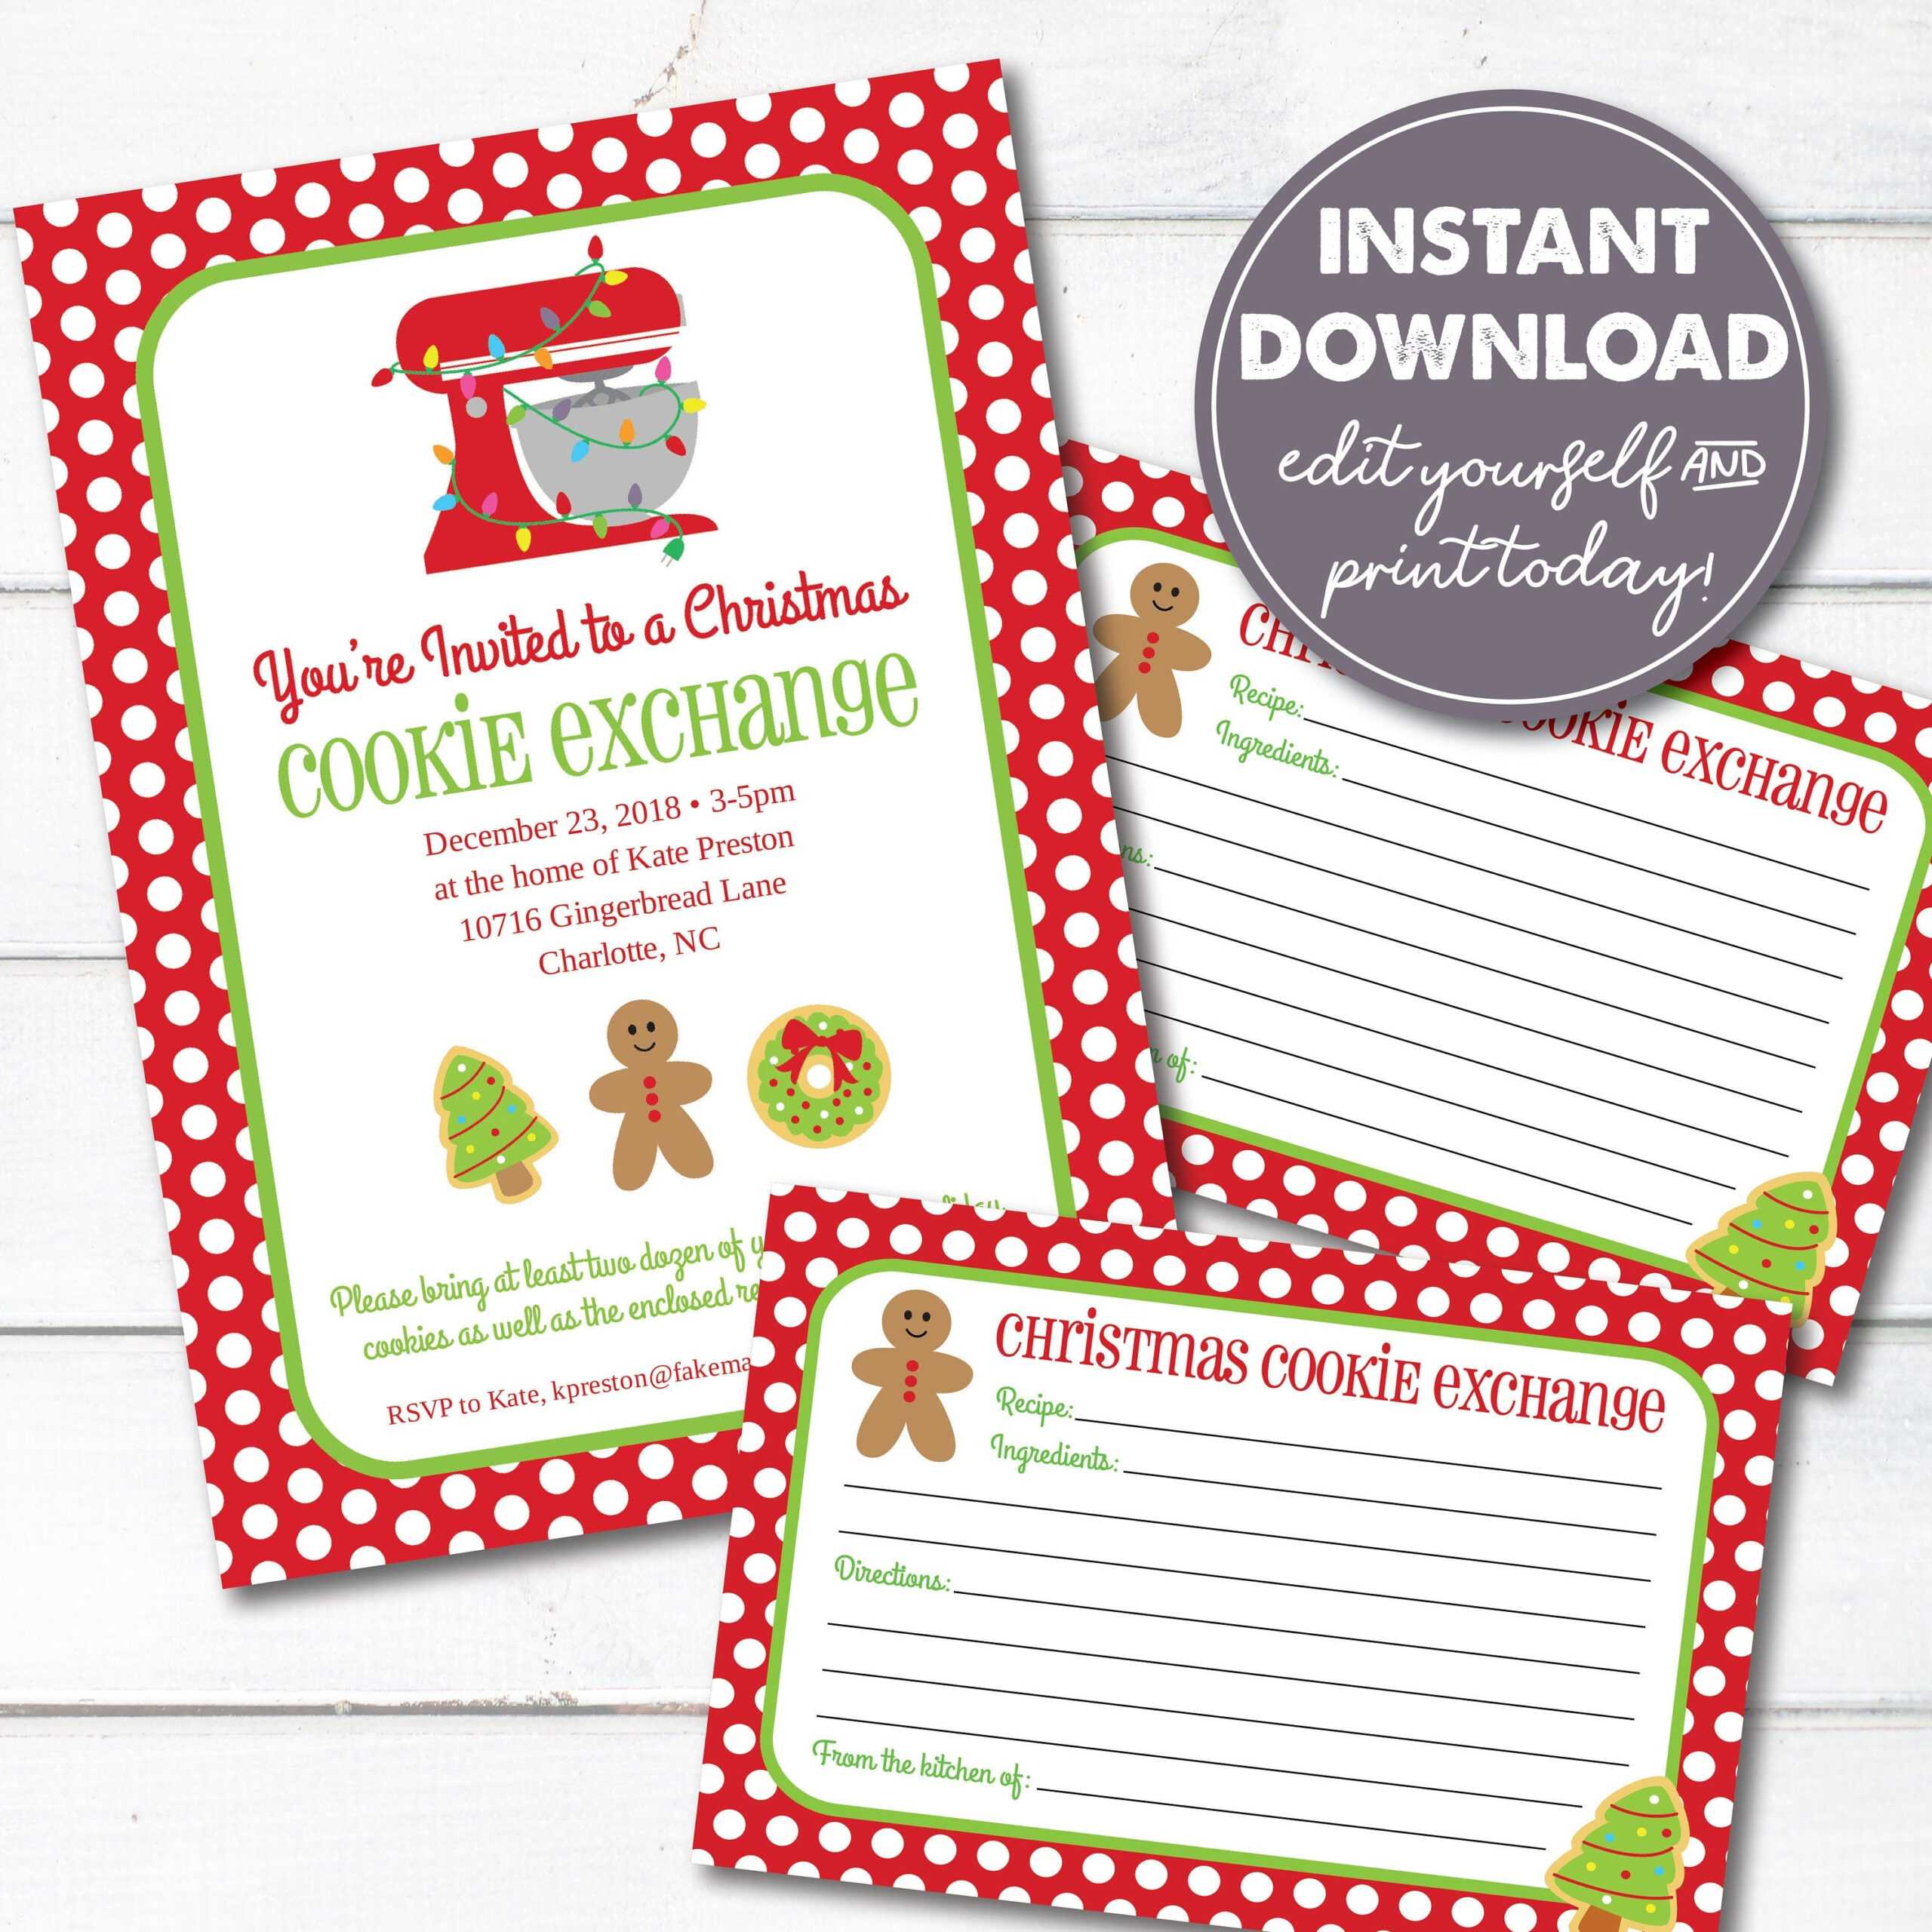 Editable Cookie Exchange Christmas Party Invitation And Recipe Cards,  Instant Download, Holiday Cookie Party Invitation For Cookie Exchange Recipe Card Template